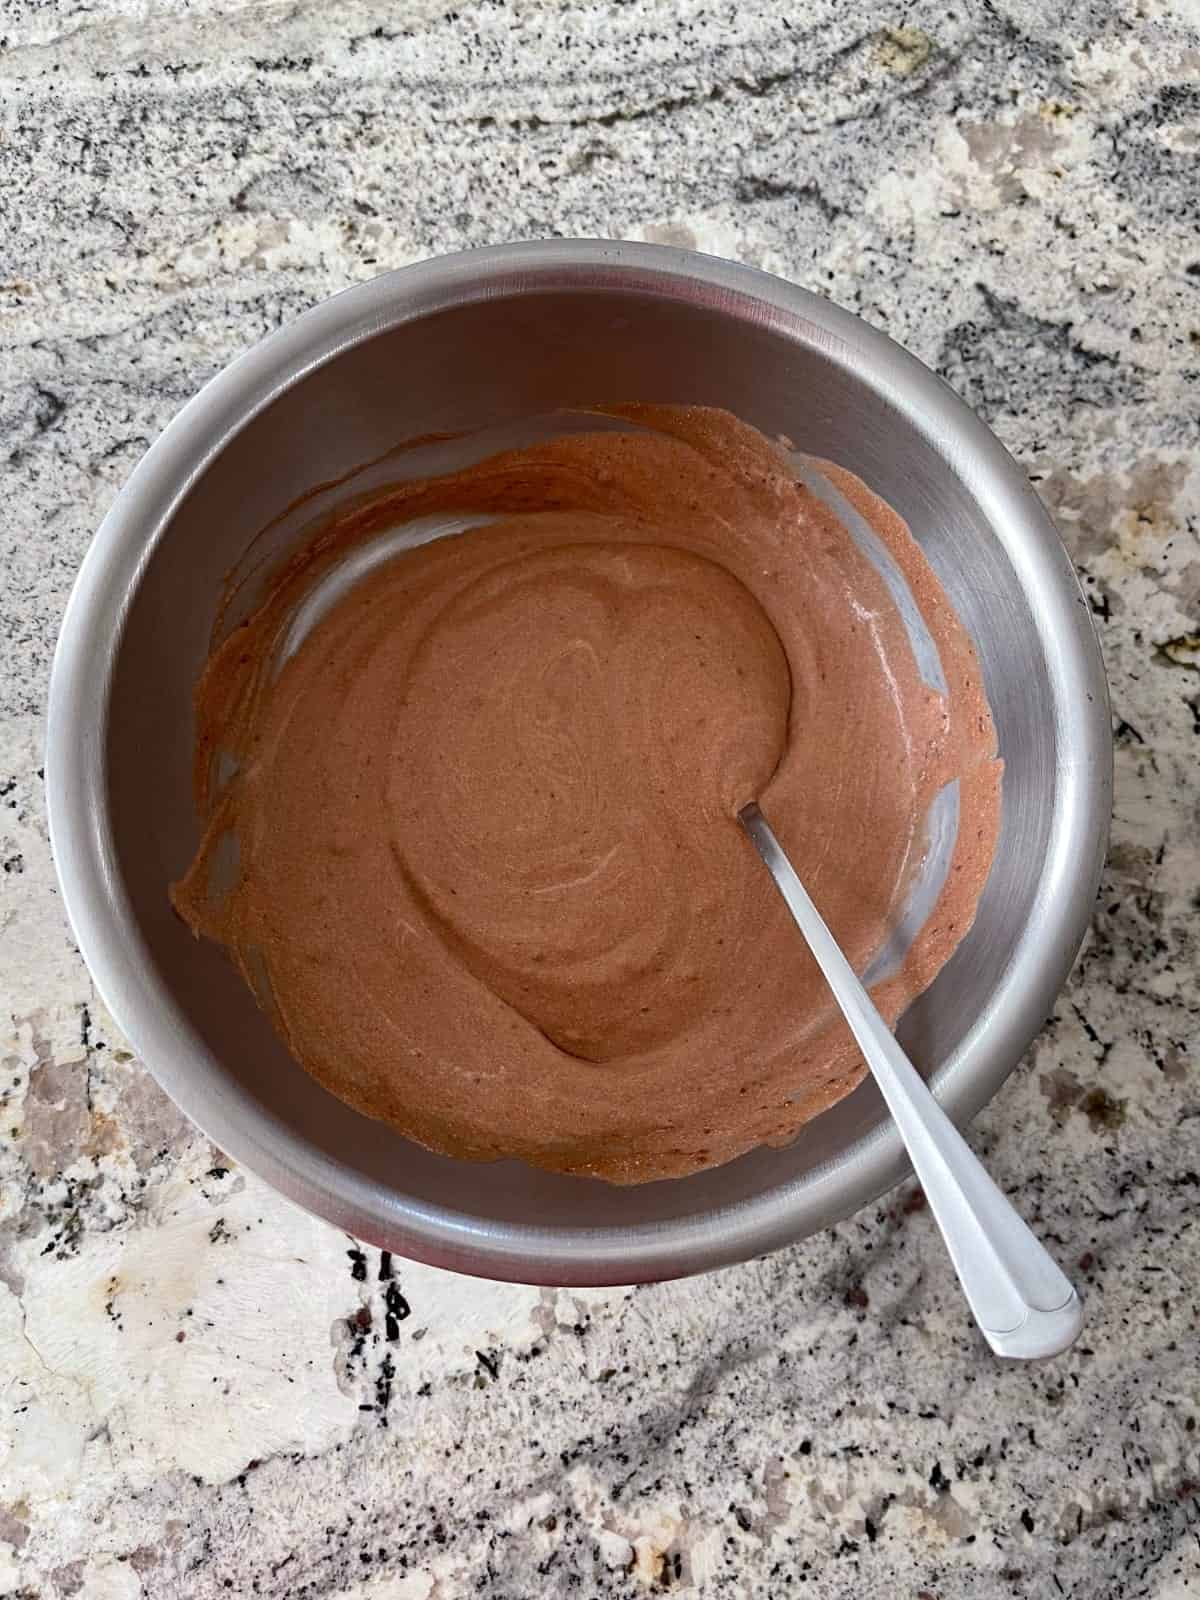 Stirring Truwhip whipped topping into instant chocolate pudding mix.